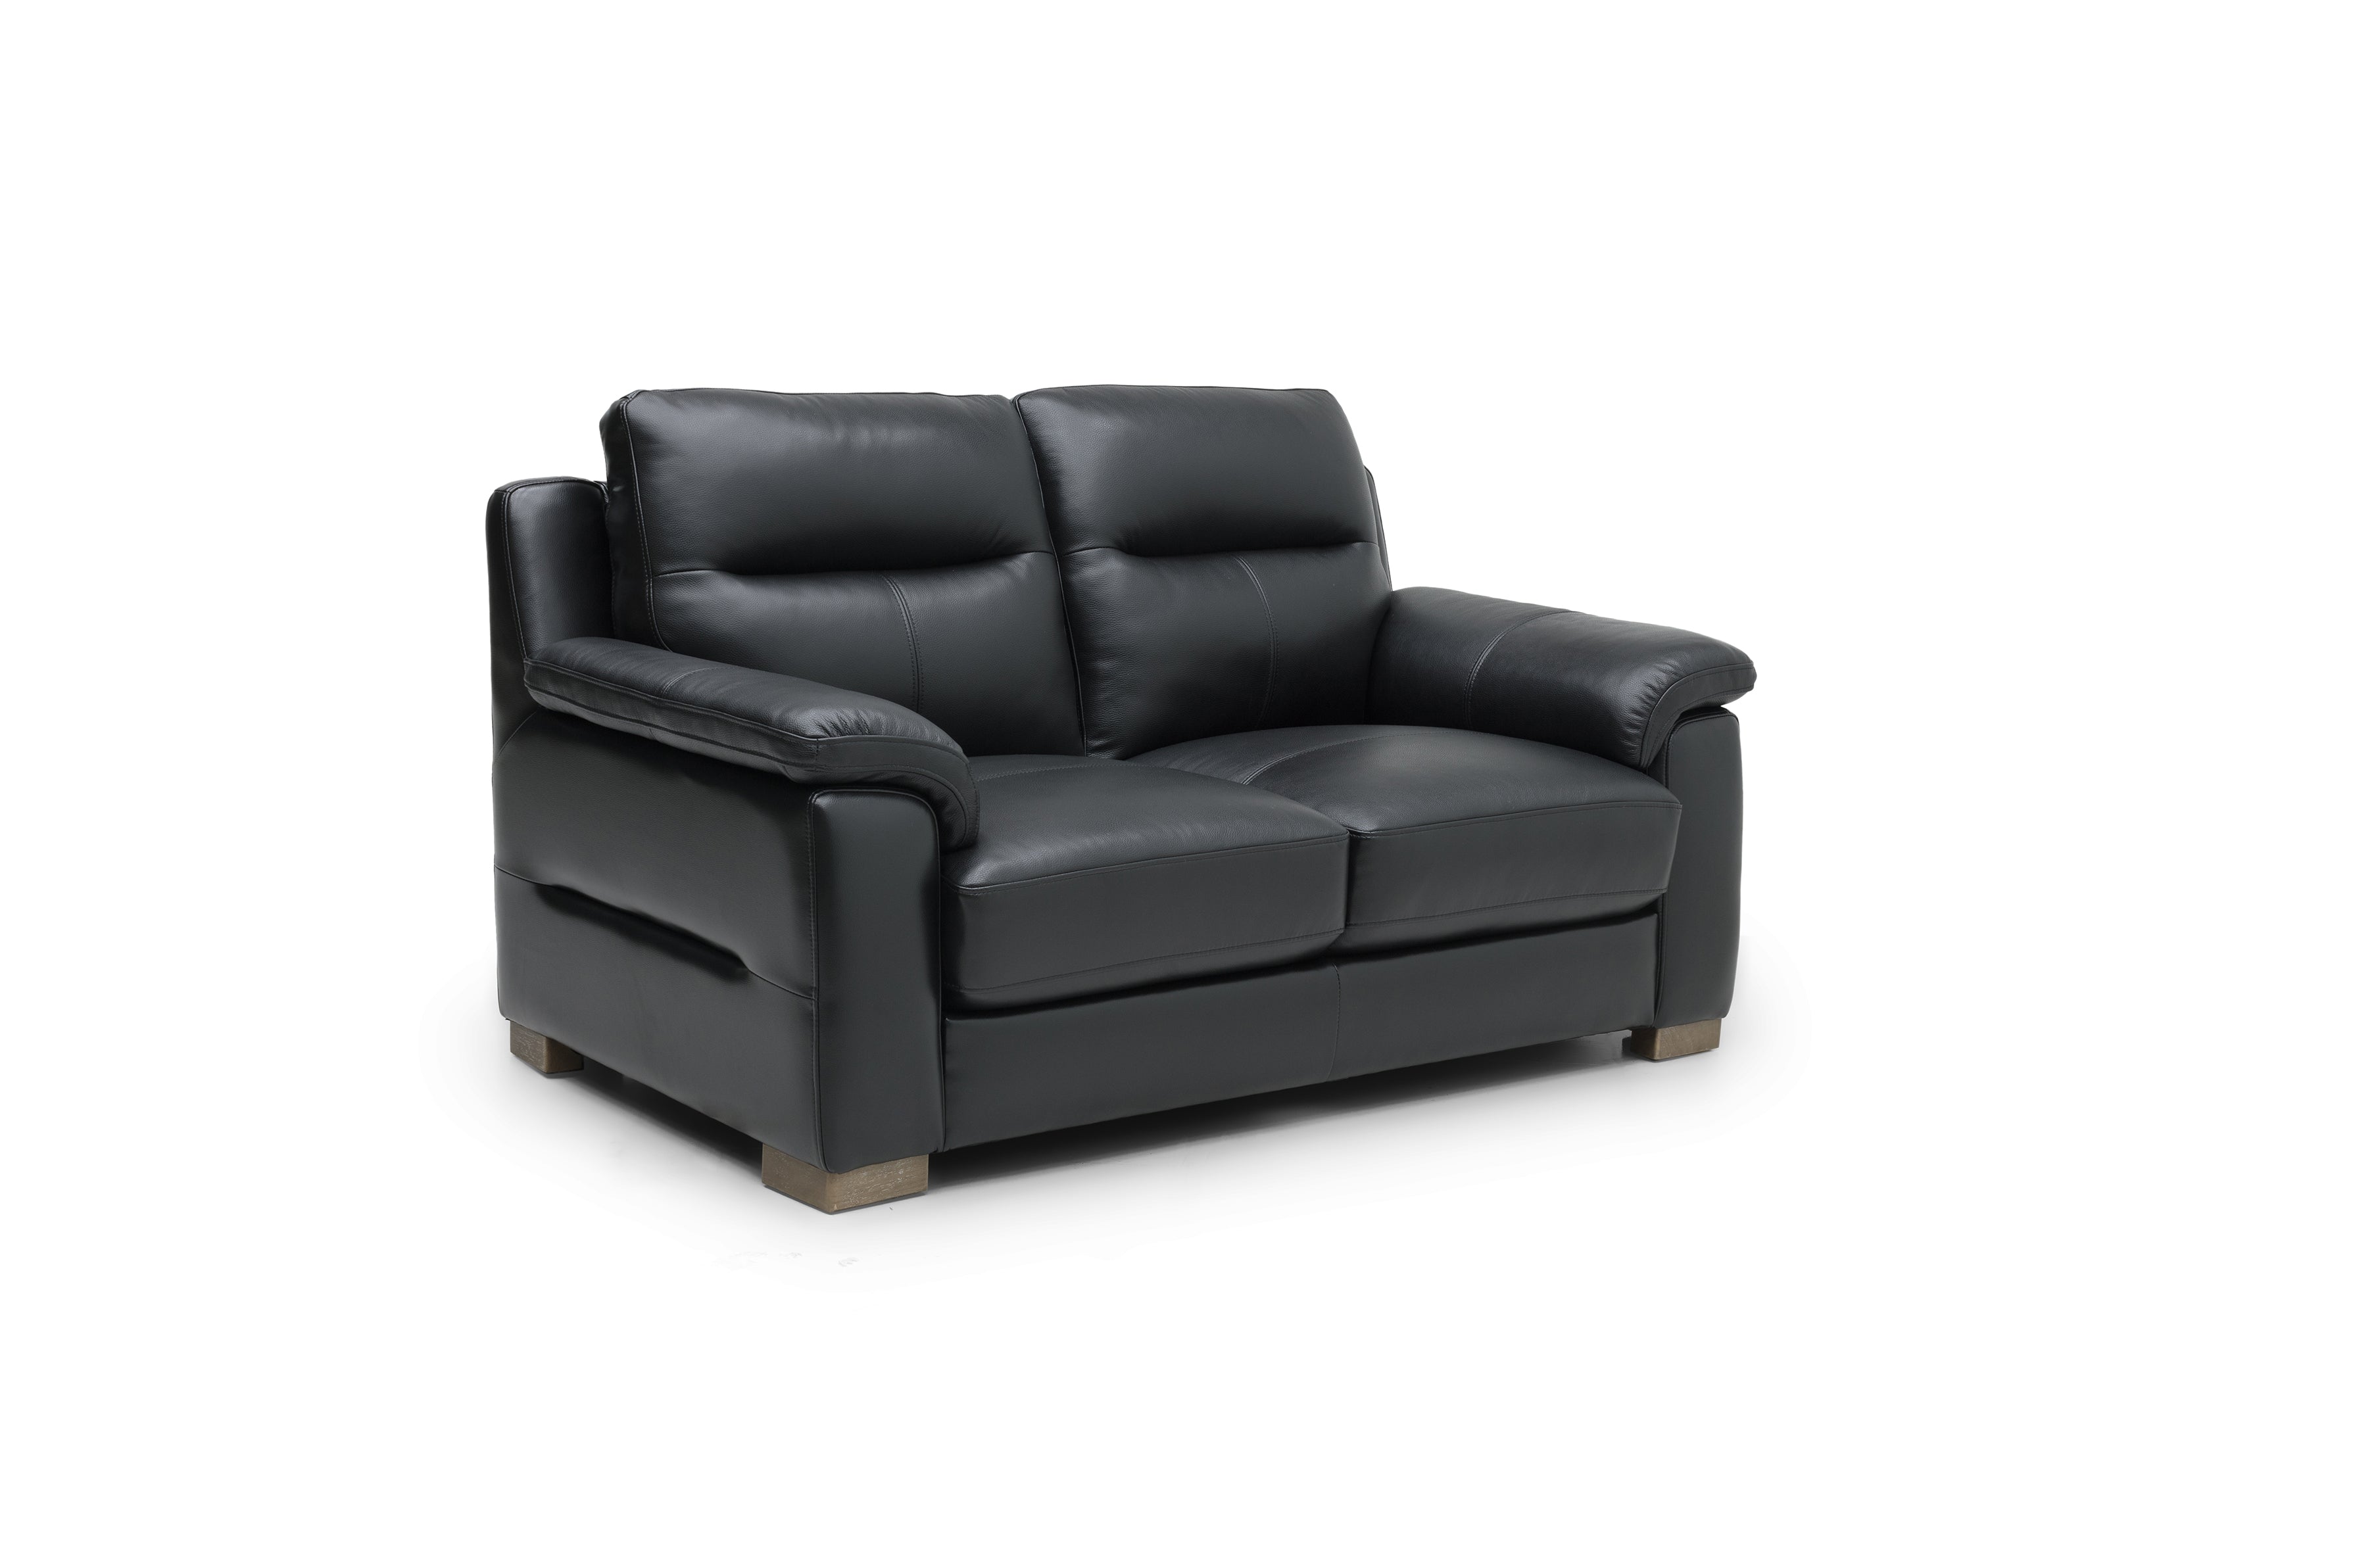 Cannes Leather 2 Seater Sofa